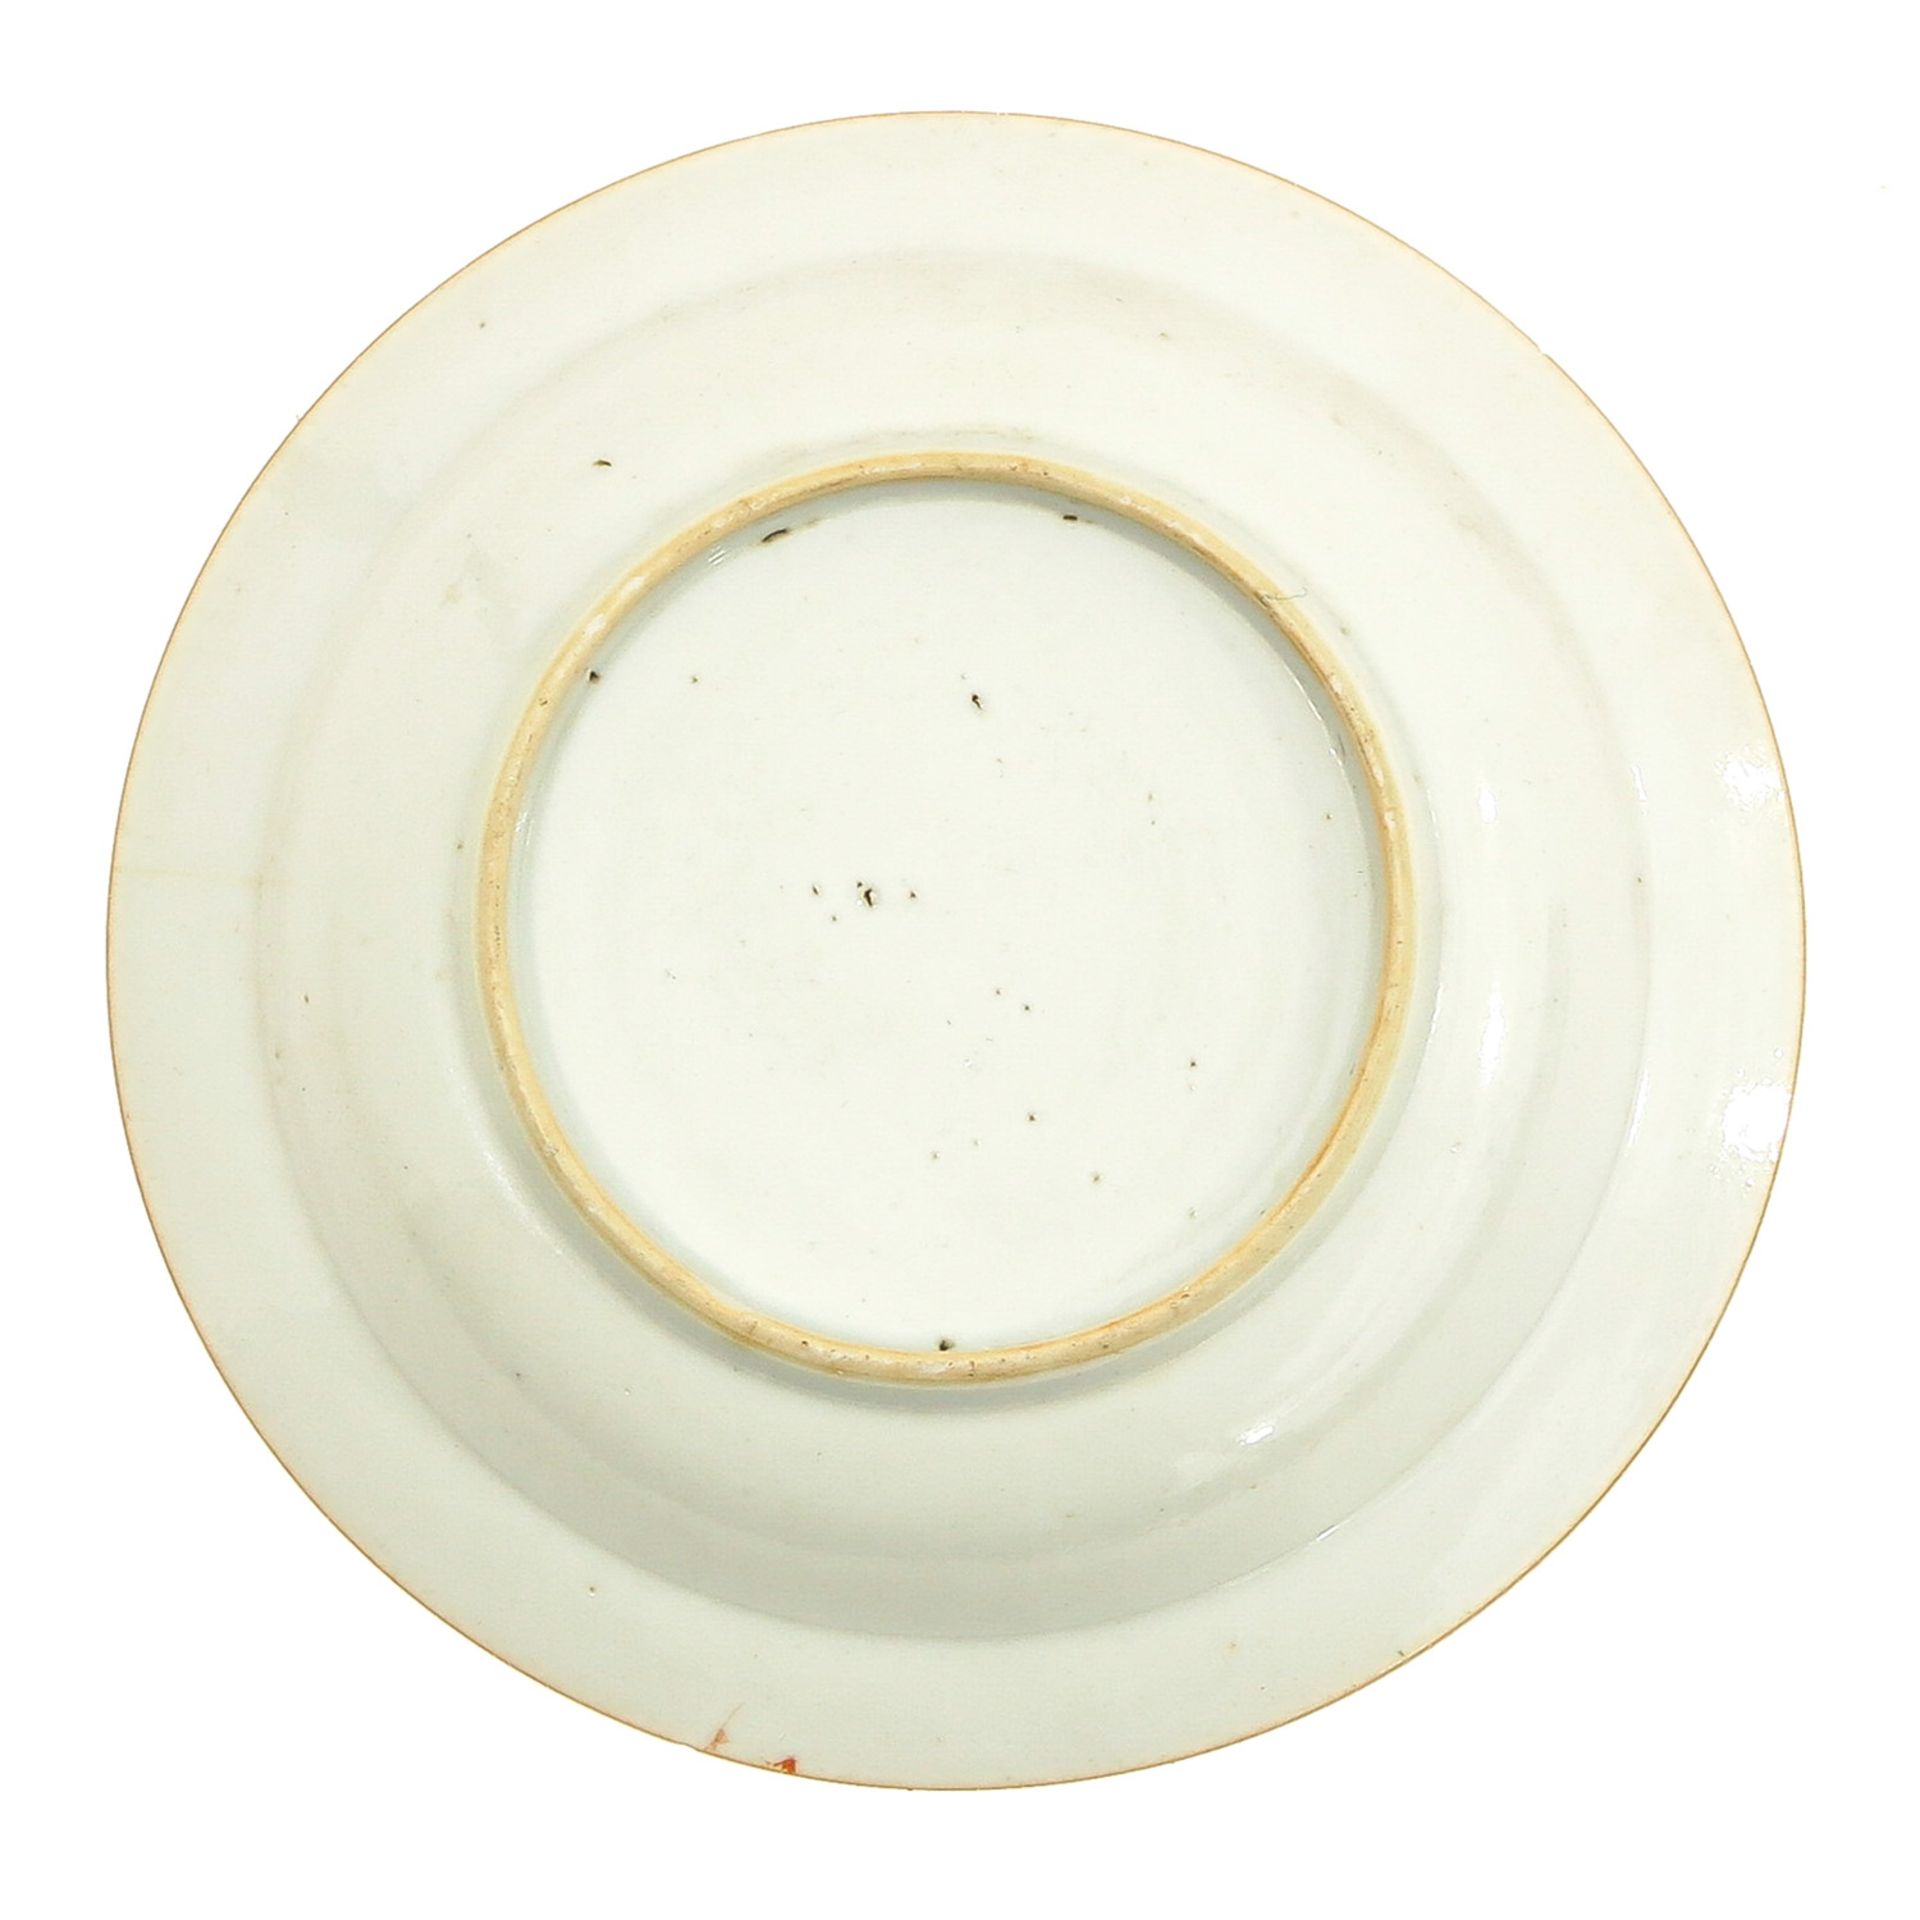 A Series of 3 Small Milk and Blood Decor Plates - Image 6 of 10